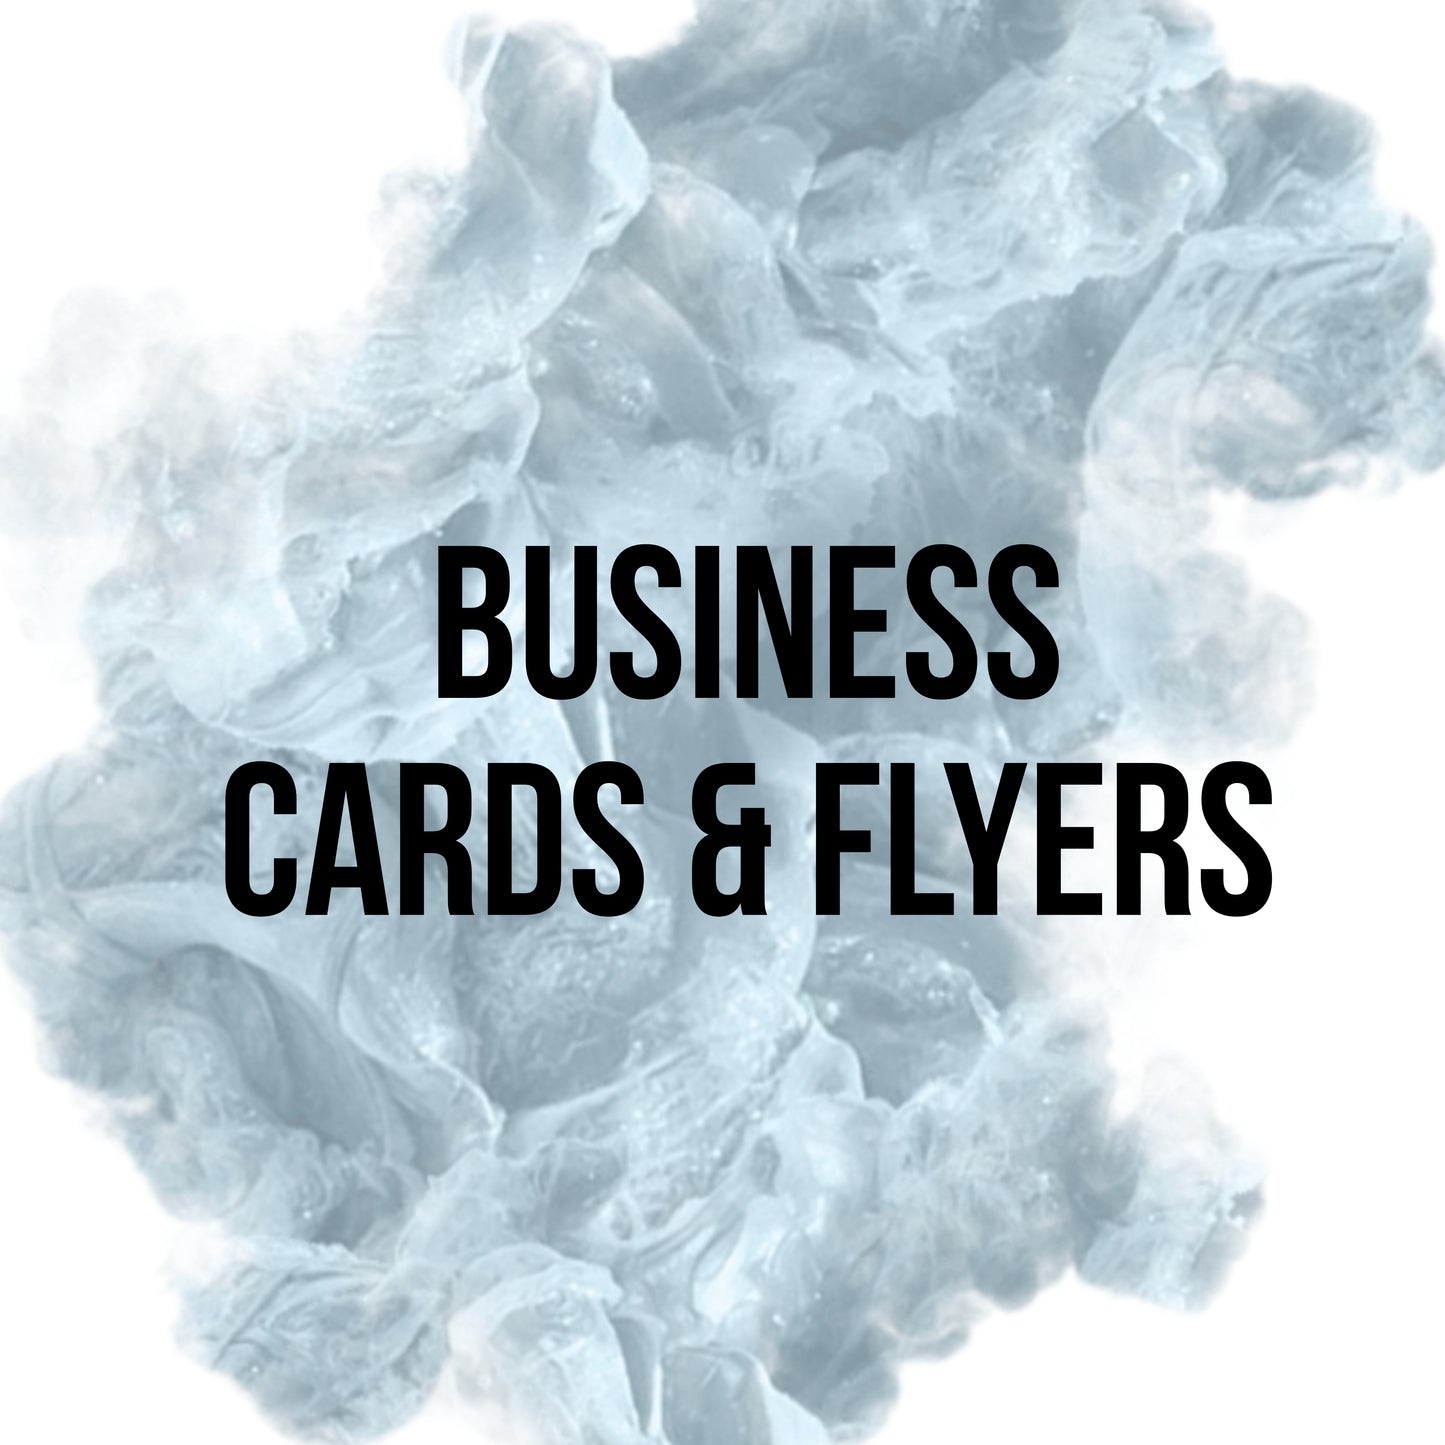 BUSINESS CARDS & FLYERS